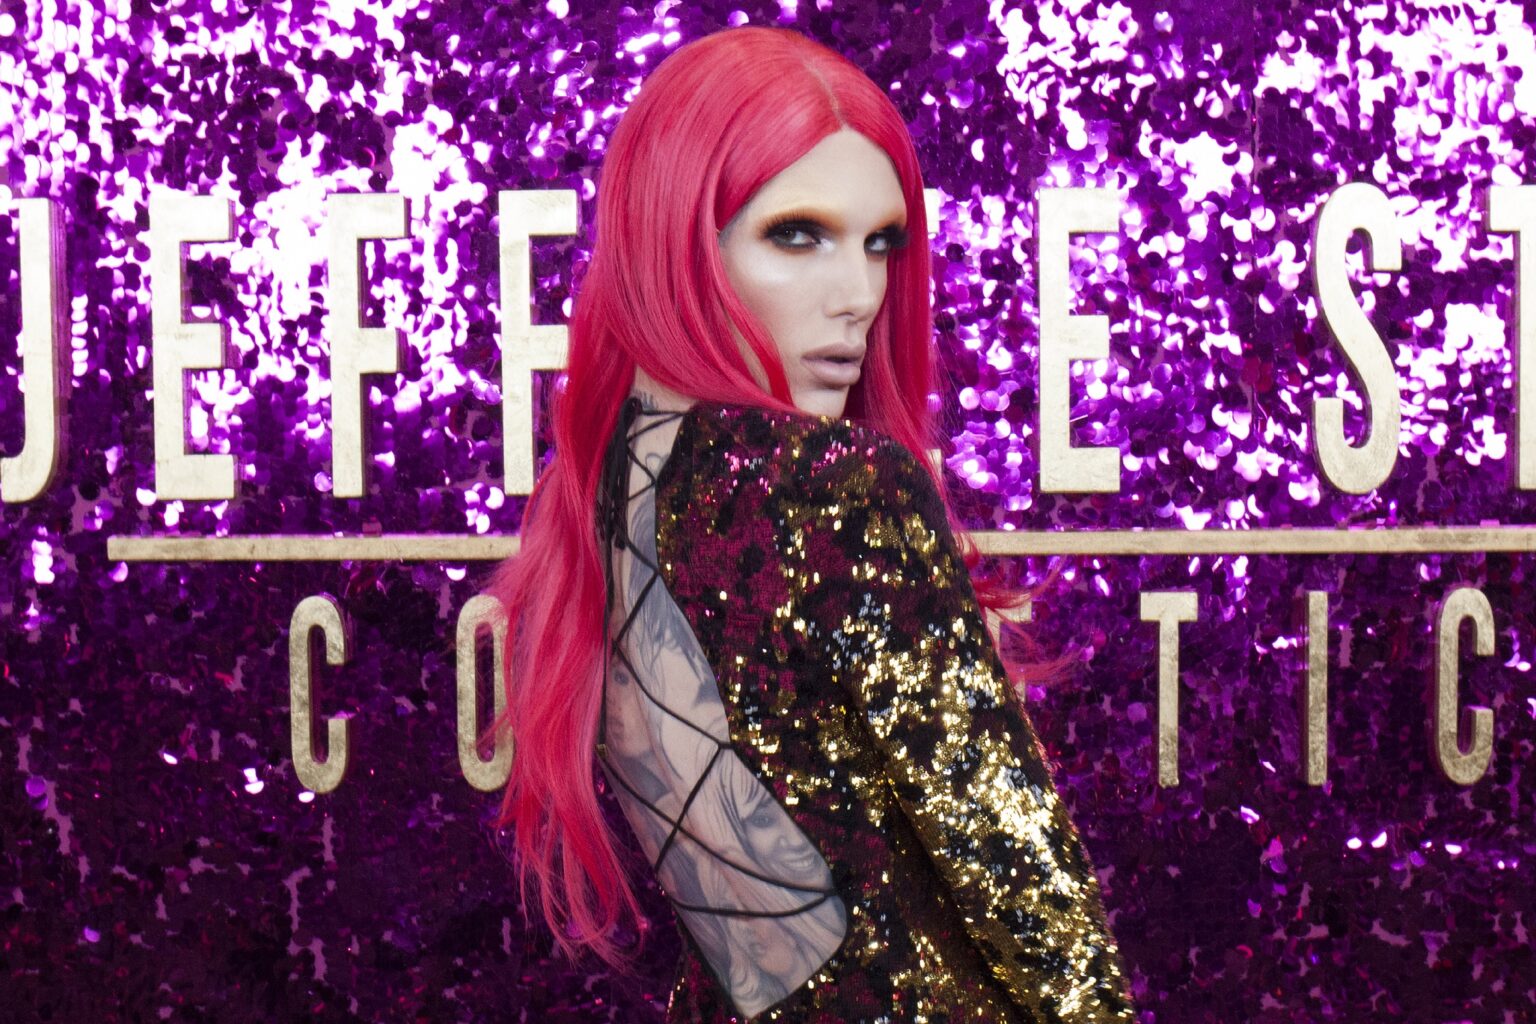 Finally, the sub count on Jeffree Star's YouTube channel is sinking, but Star should've lost his numbers years ago. He's never stopped being problematic.